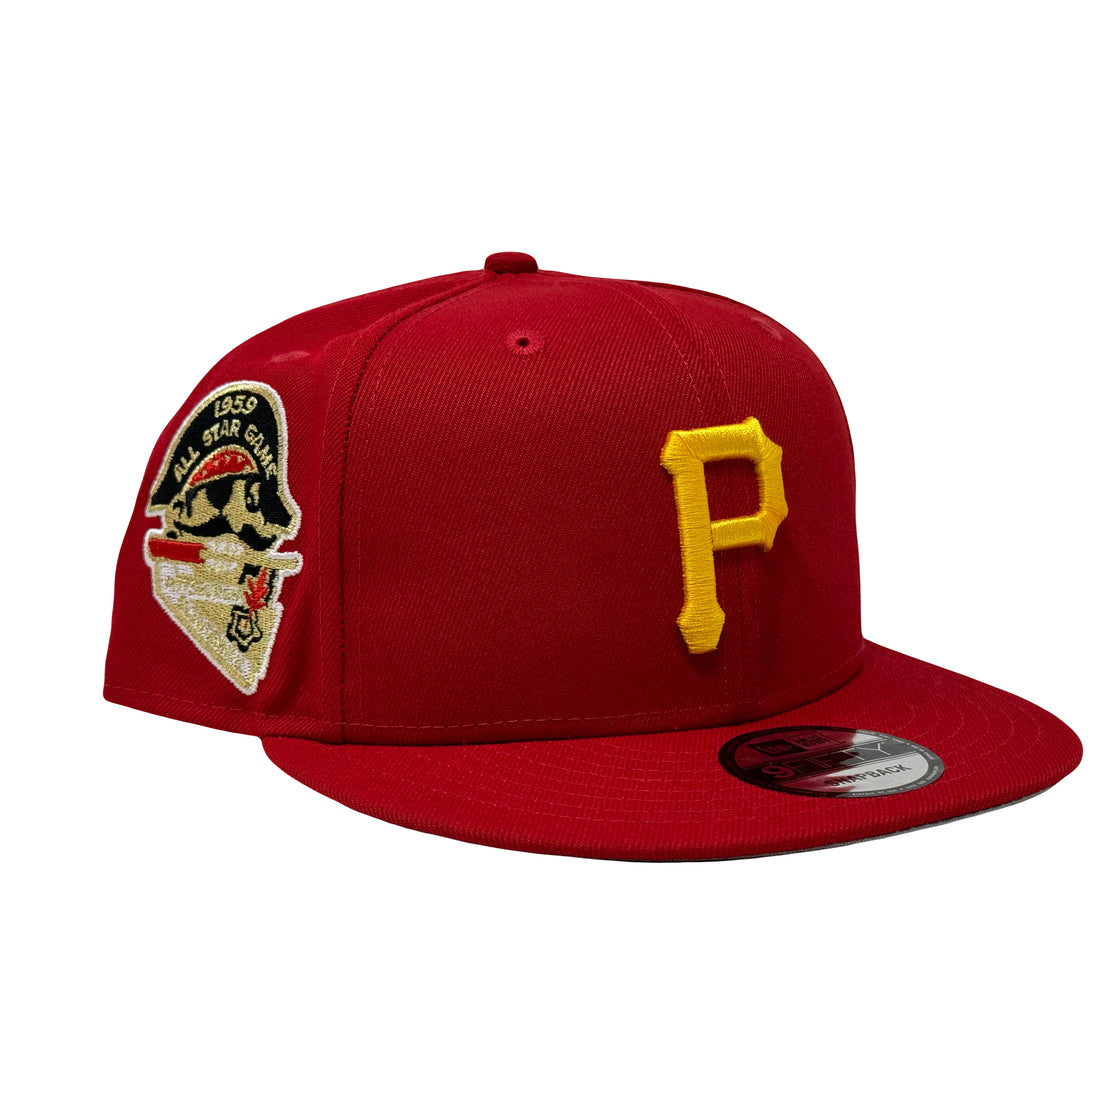 Pittsburgh Pirates 1959 All Star Game Red 9Fifty New Era Snapback Hat